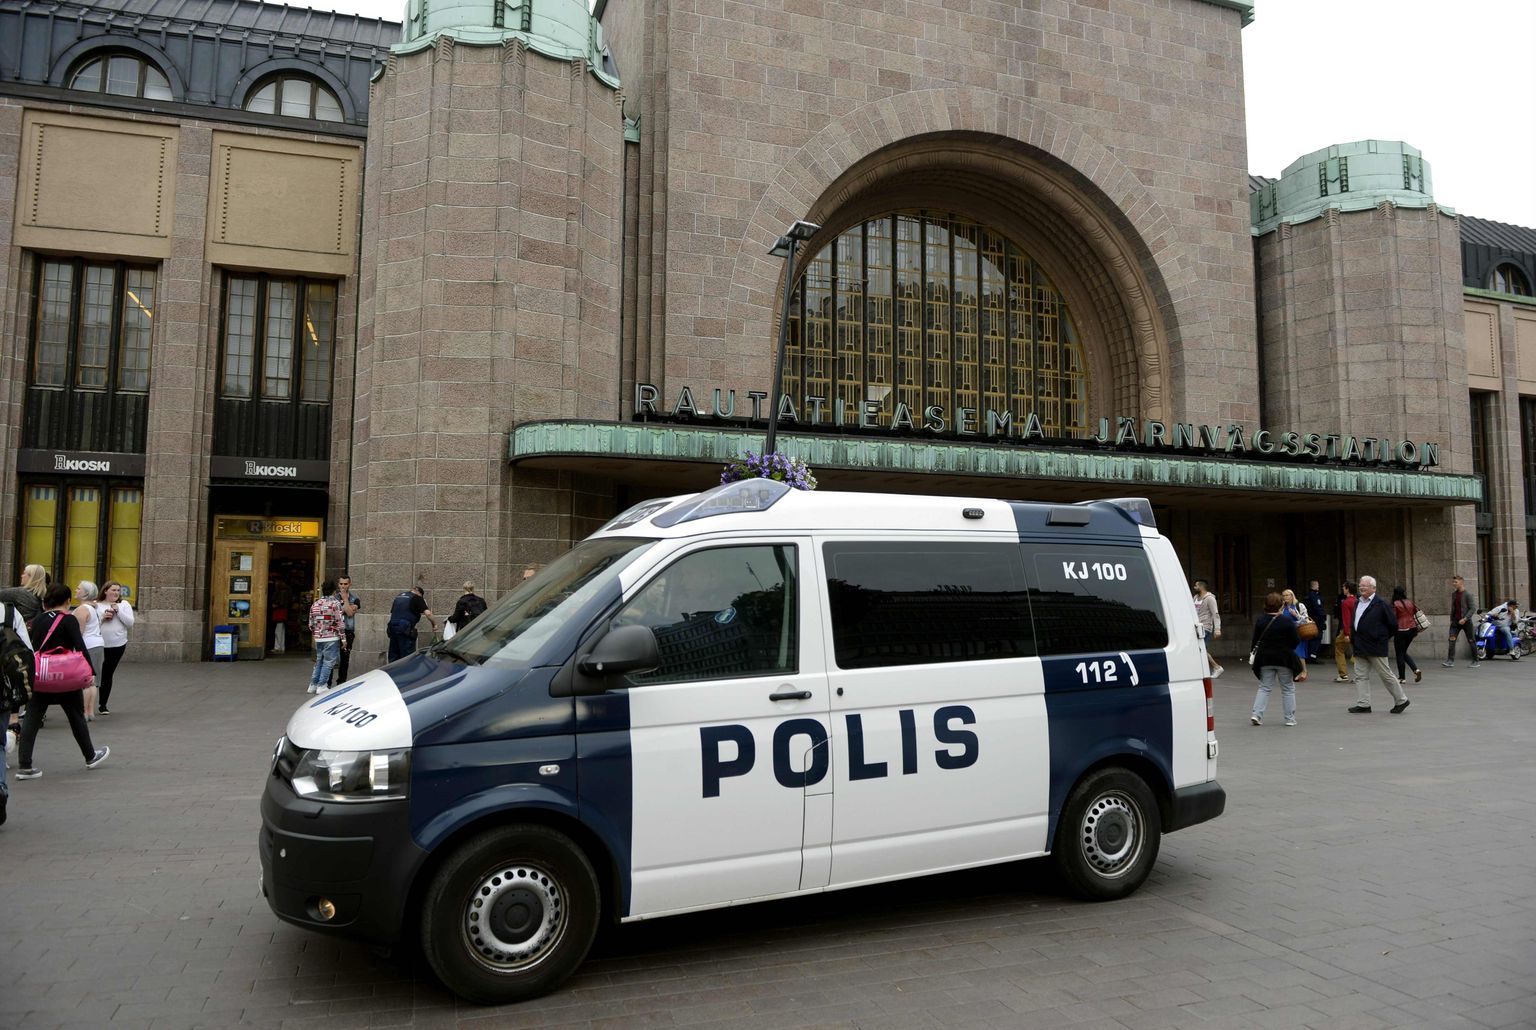 Finnish police patrols in front of the Cenral Railway Station in Helsinki on August 18, 2017.
Finnish Police announced they will rise the readiness after stabbings in Turku. / AFP PHOTO / Lehtikuva / Linda Manner / Finland OUT